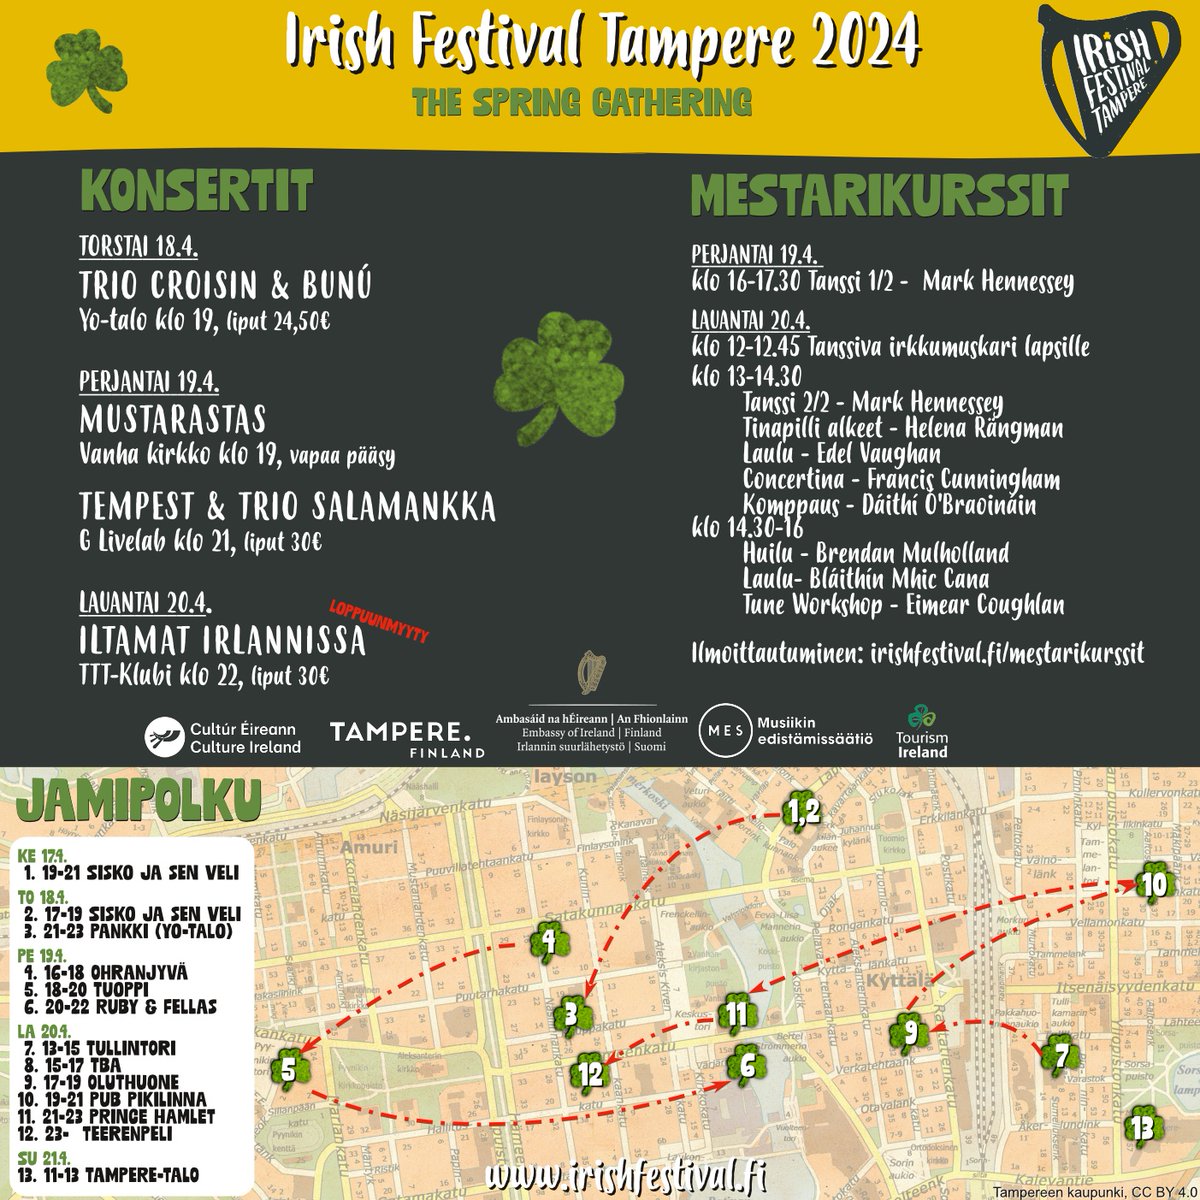 One week to go until #IrishFestivalTampere - the Spring Gathering 2024 kicks off! 🇮🇪 ☘️4 main concerts 🎶 ☘️9 master classes 🪈 ☘️13 sessions across the city 🎻 All the details: irishfestival.fi/en/